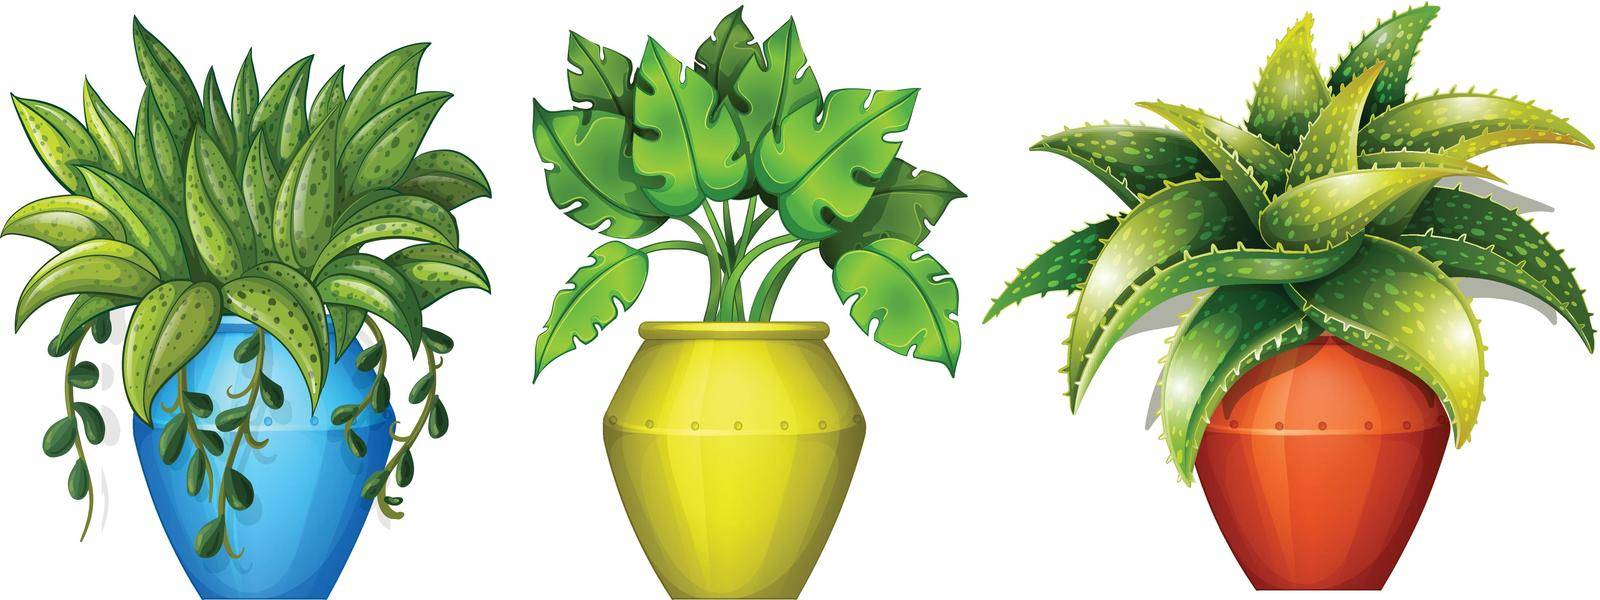 Illustration of the plants in the pot on a white background